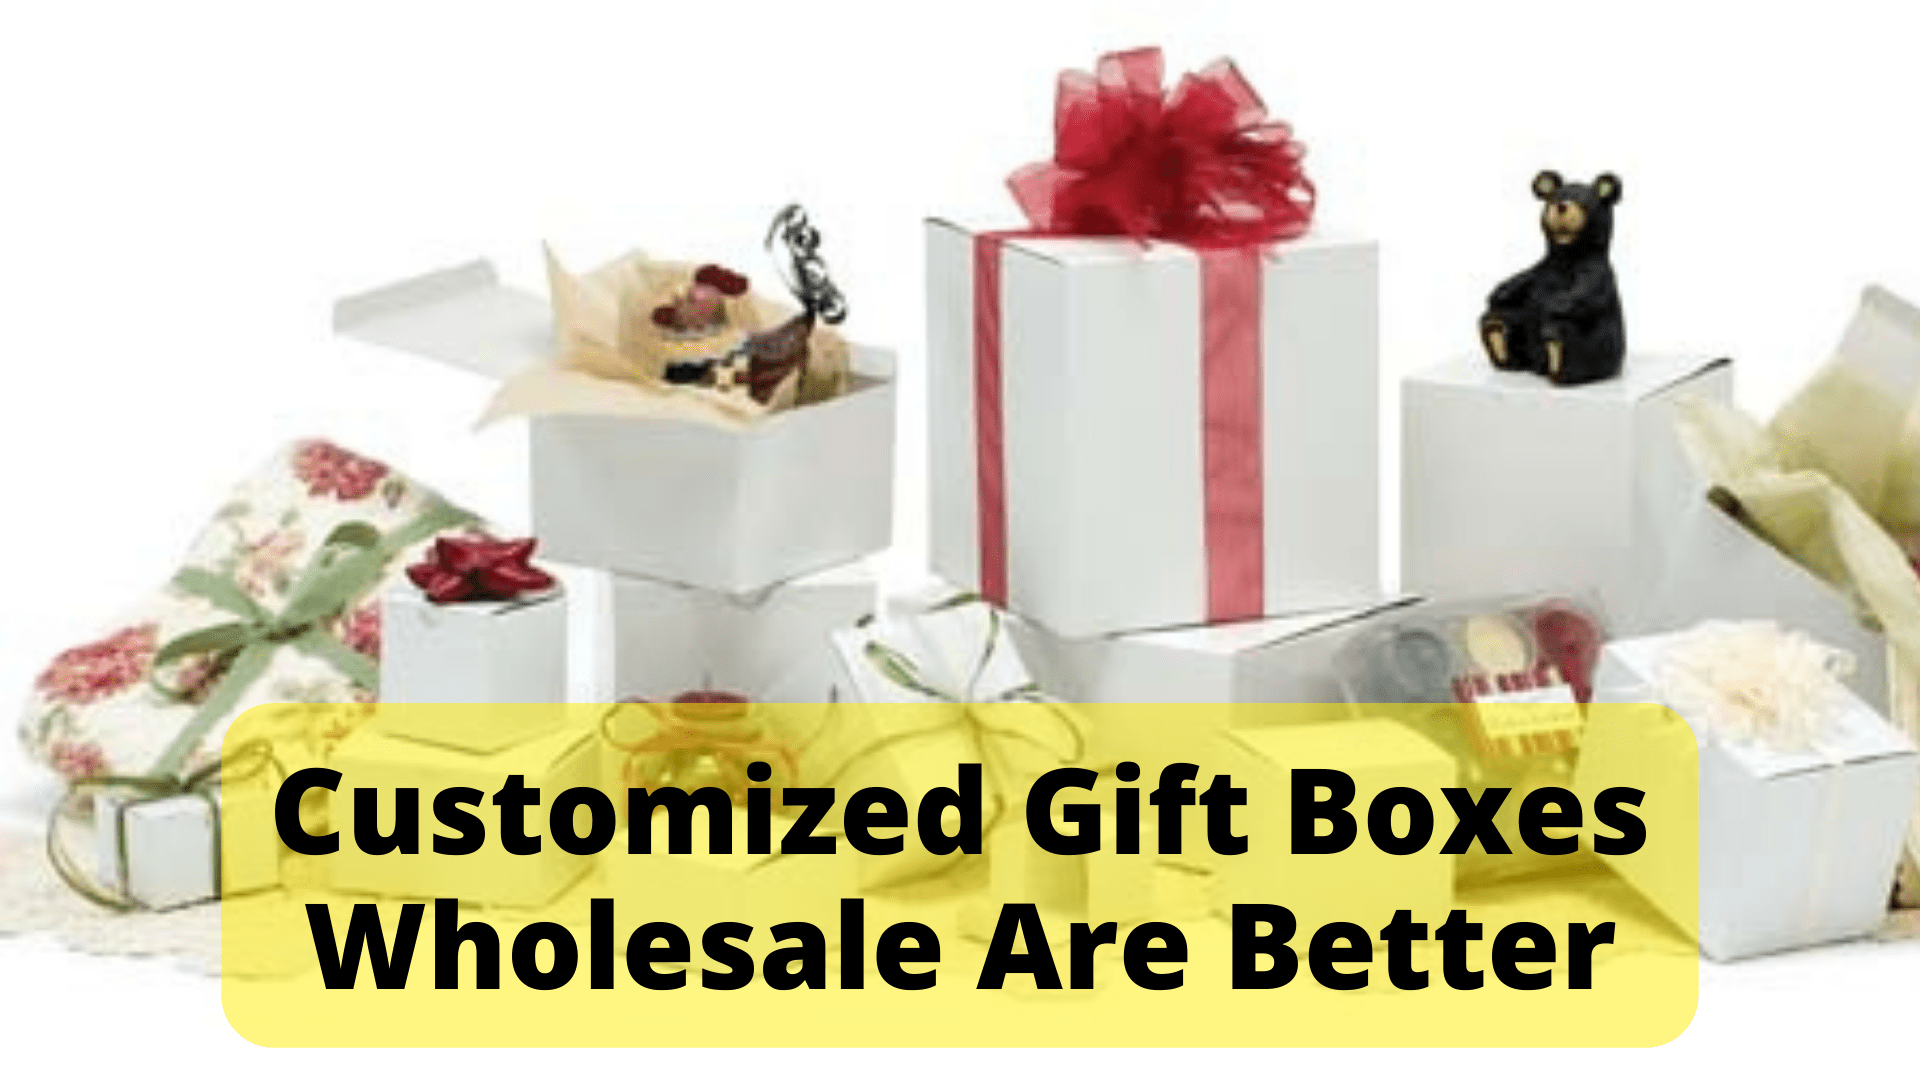 How Customized Gift Boxes Wholesale Are Better Than Other Packagings